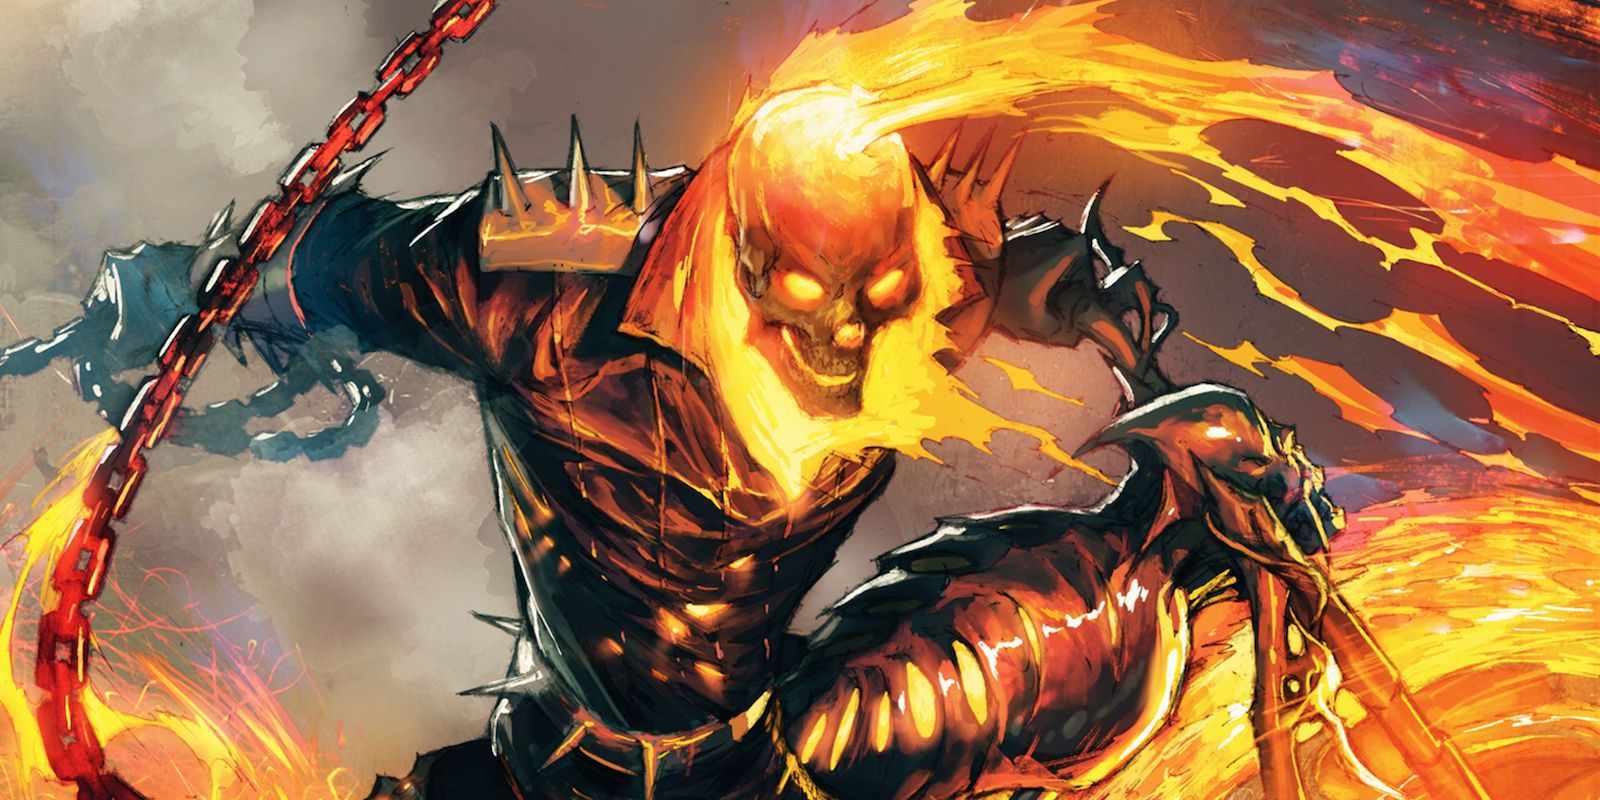 Ghost Rider whips his chain in Marvel Comics.